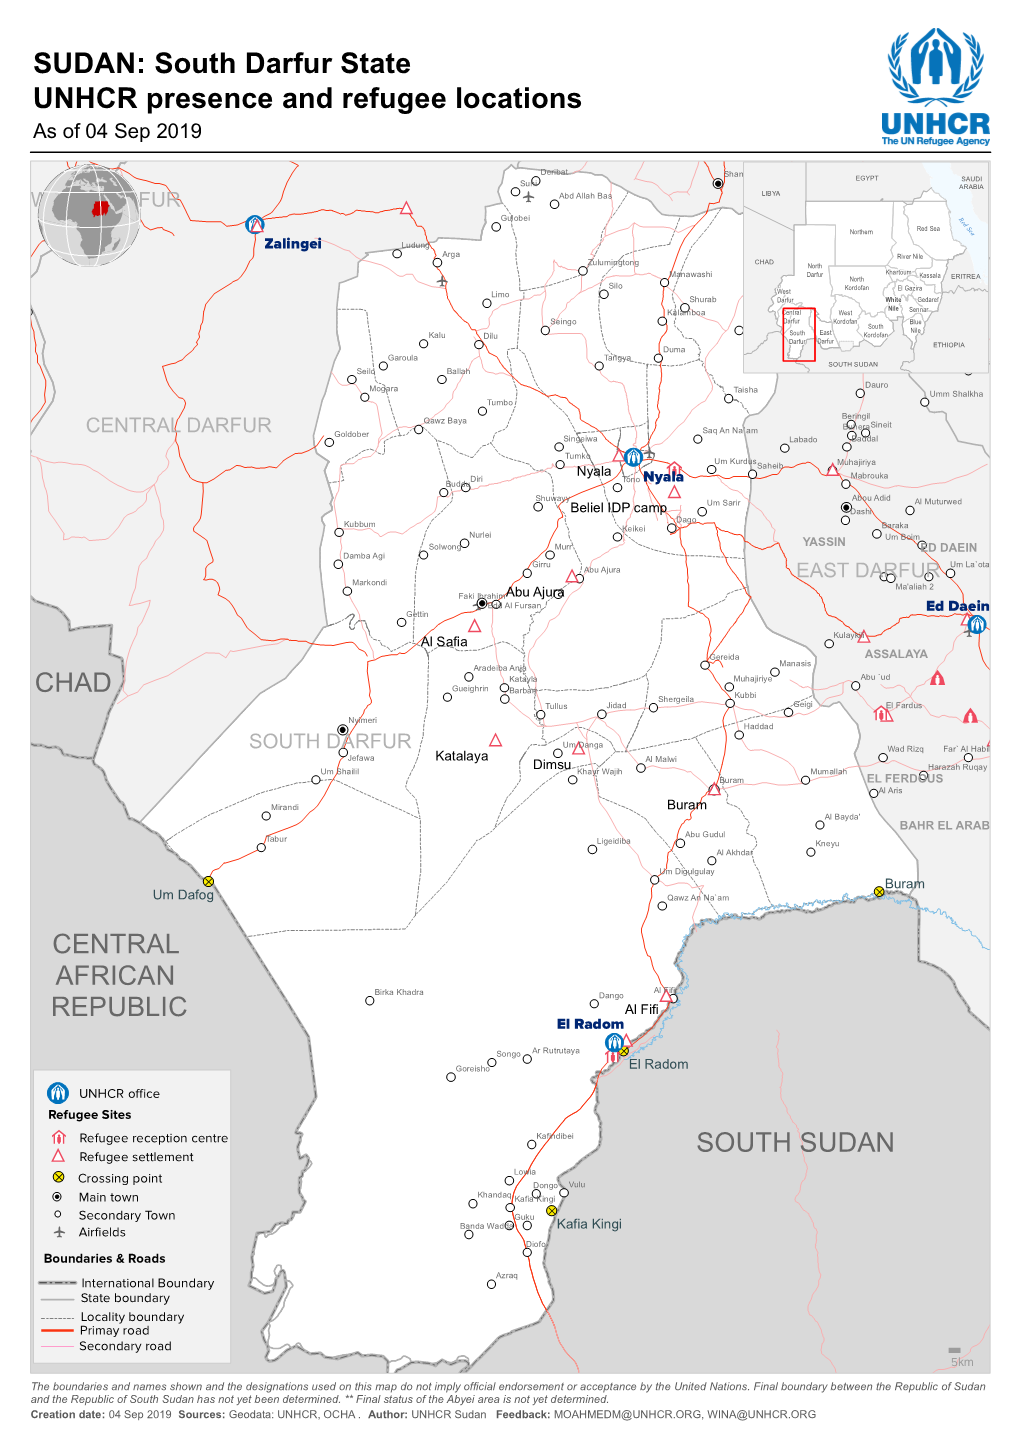 South Darfur State UNHCR Presence and Refugee Locations